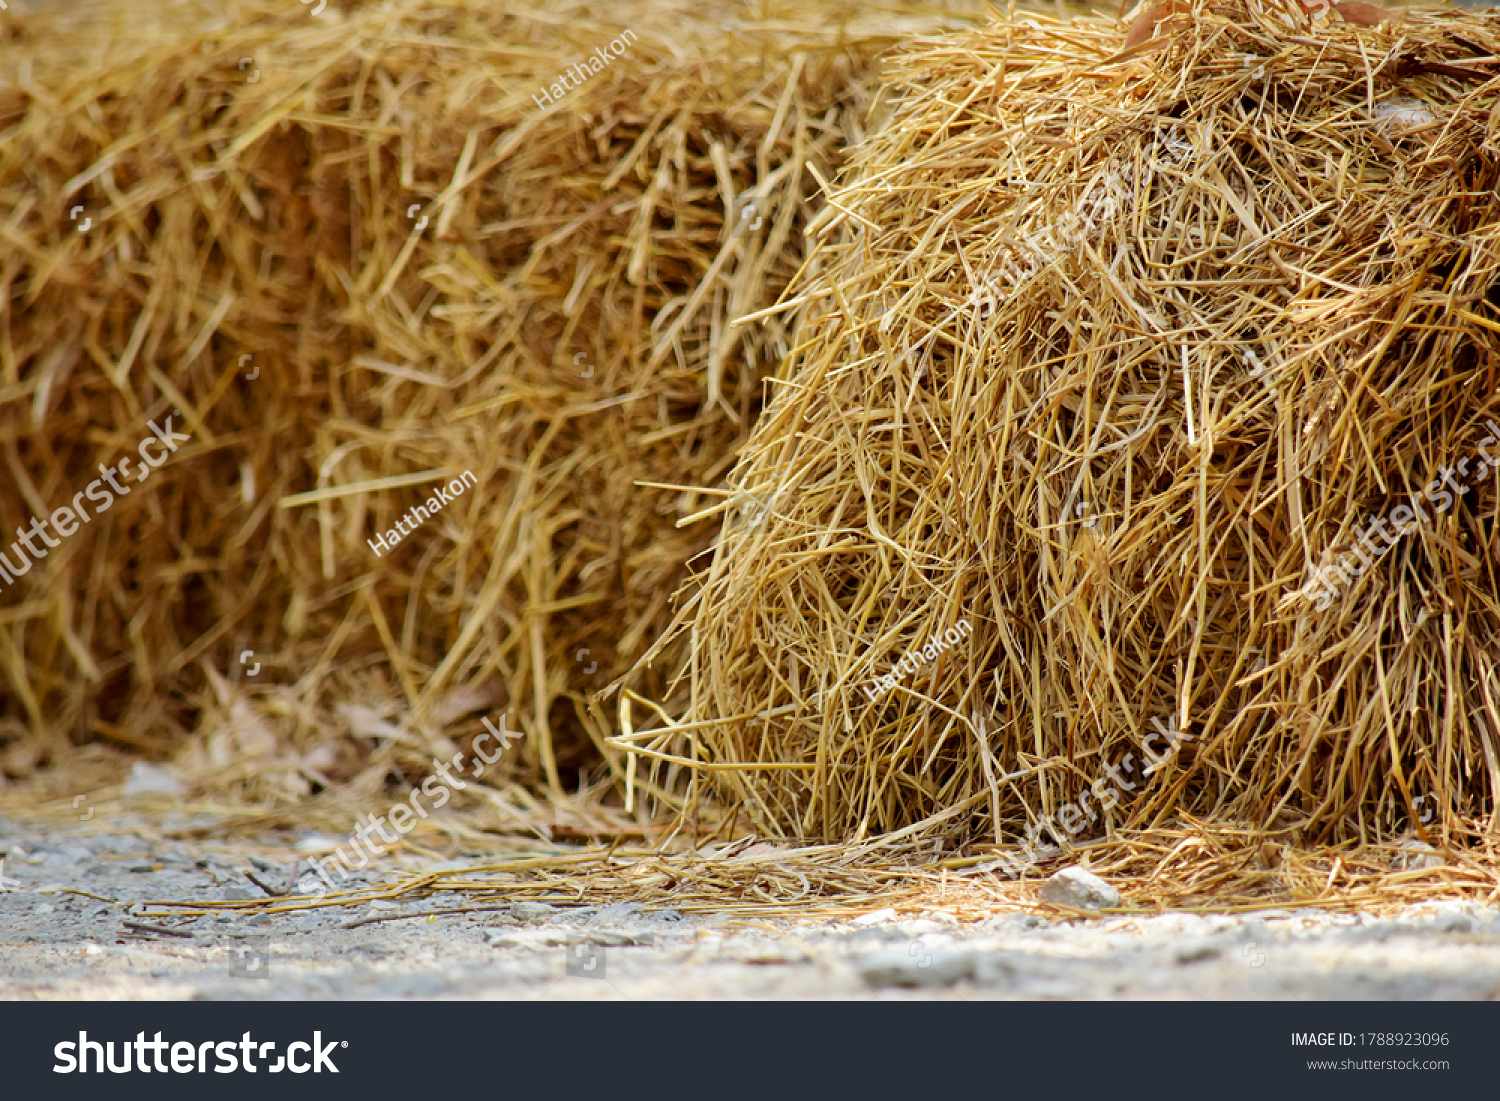 Haystack, hay straw, Bale of hay group, dry grass (hay), dry straw on the road.
 #1788923096